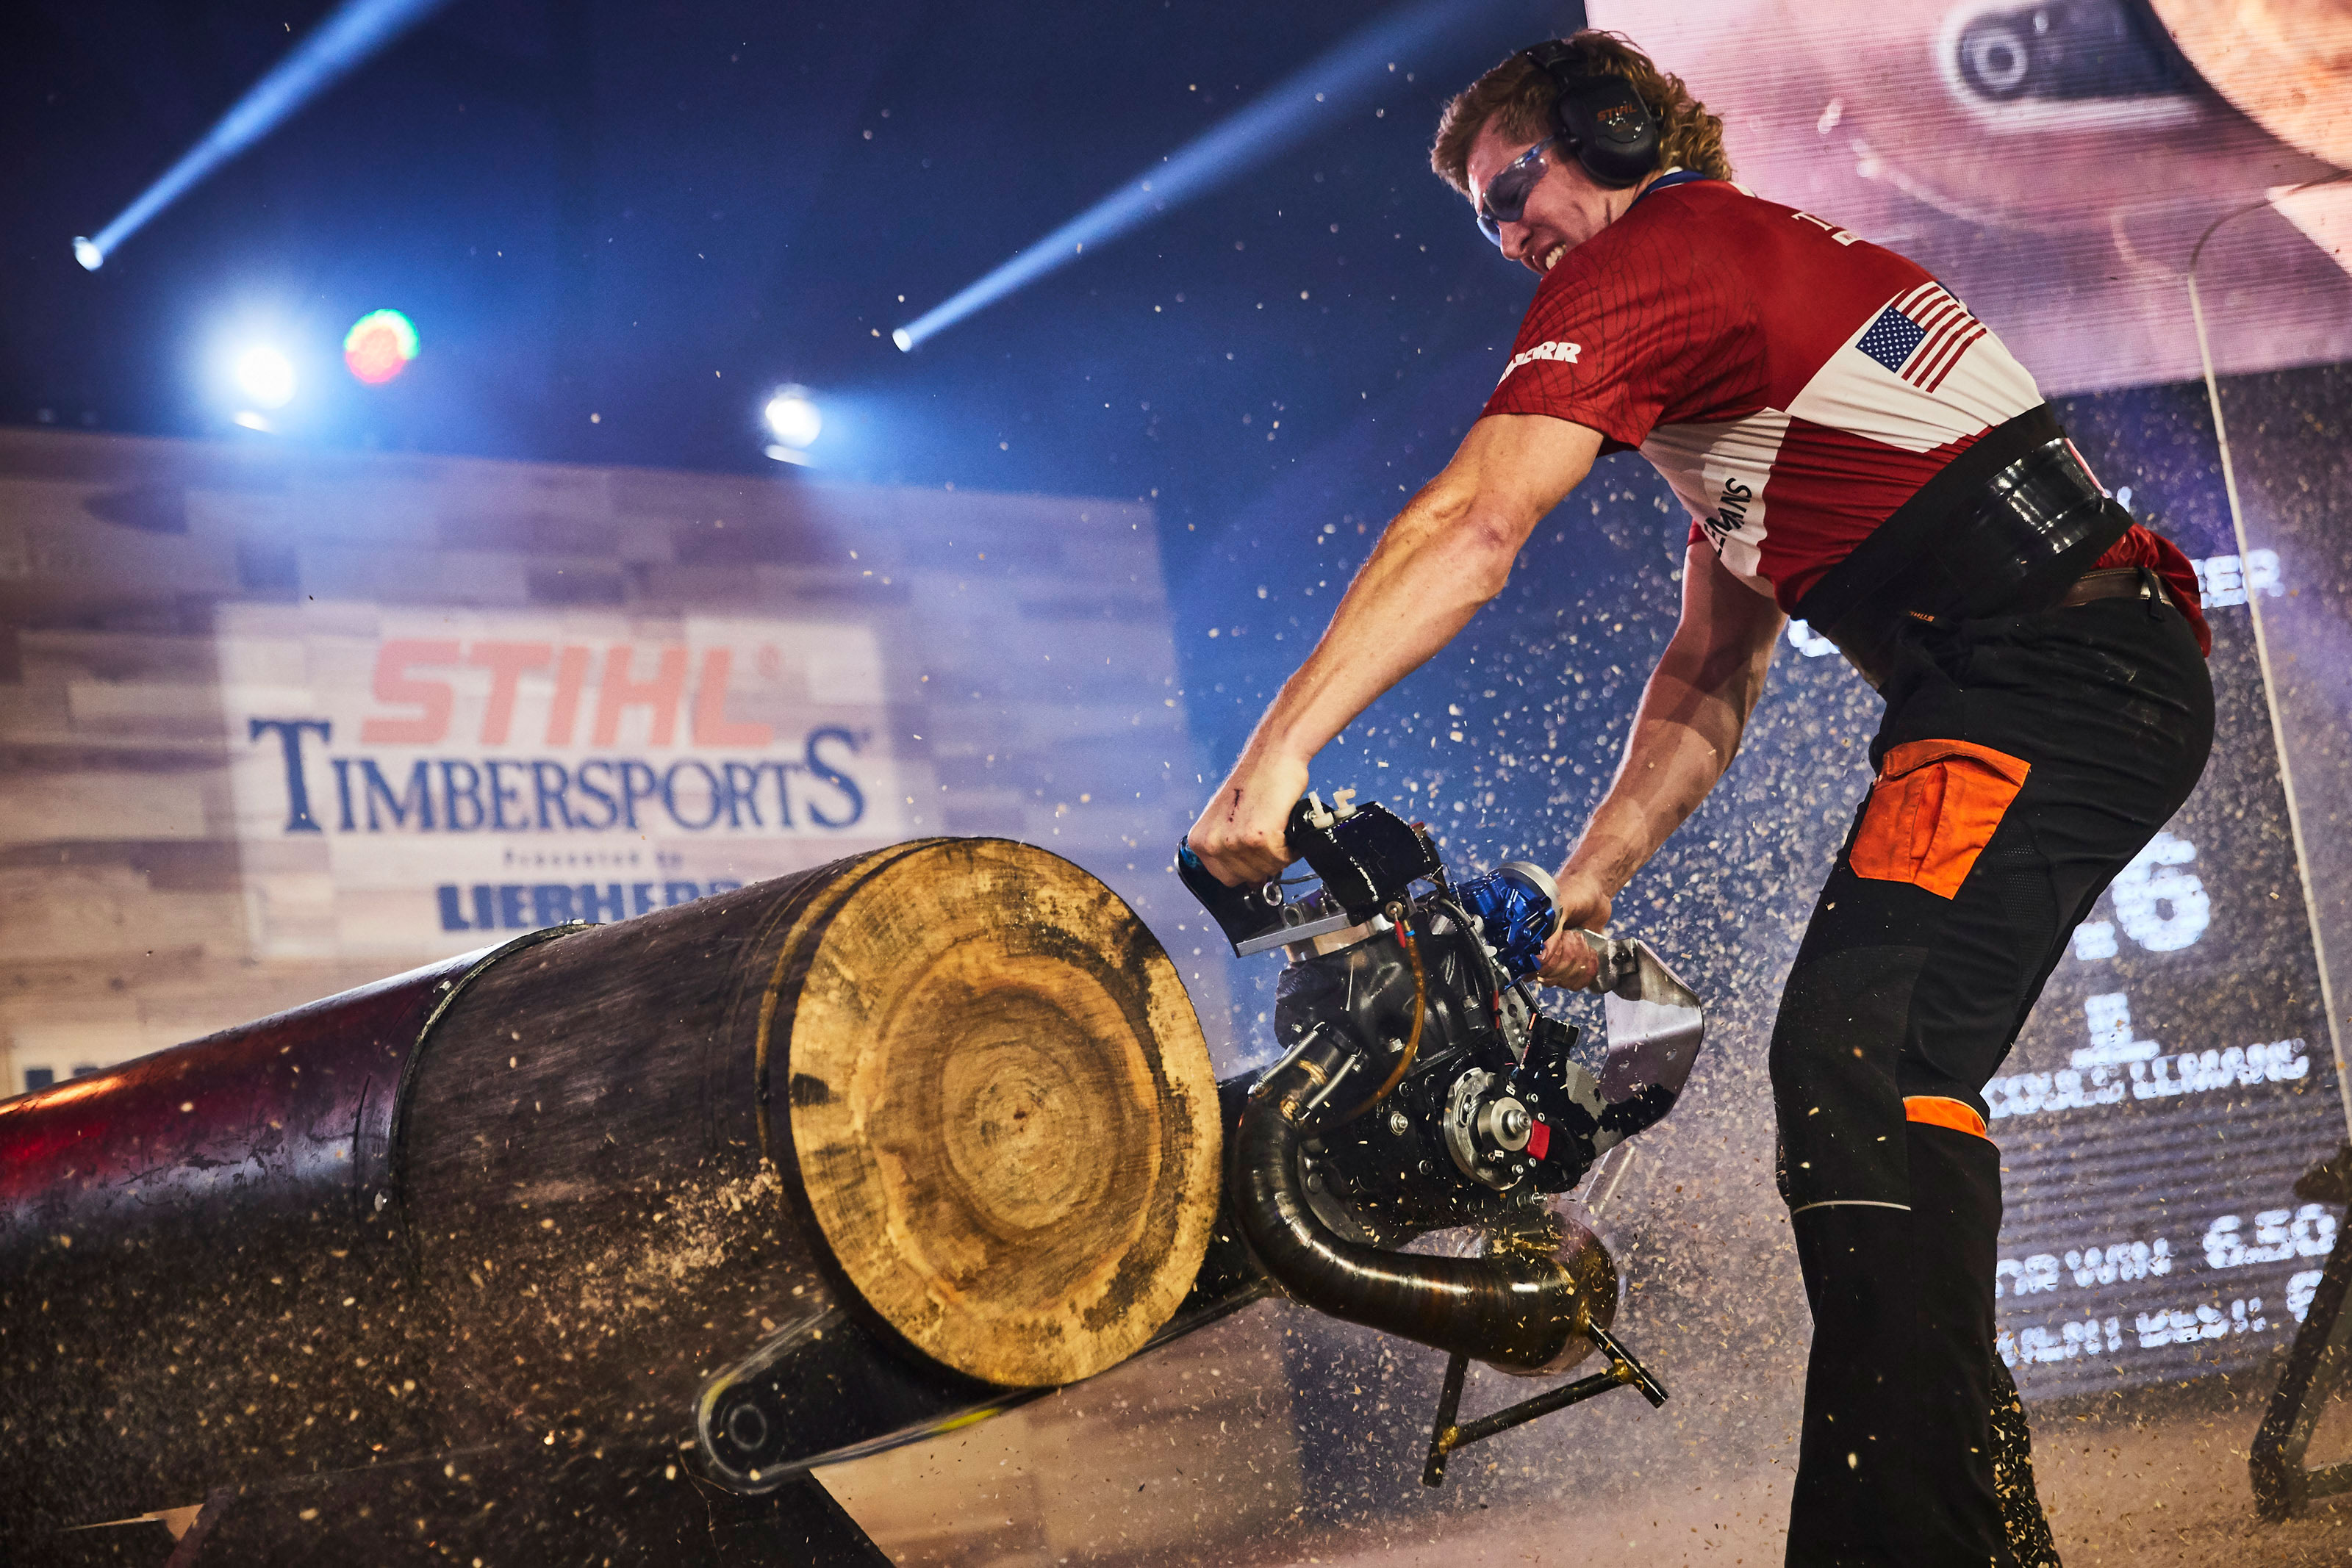 STIHL TIMBERSPORTS® athlete Cassidy Sheer from the USA at the Individual World Championship 2019 in Prague.